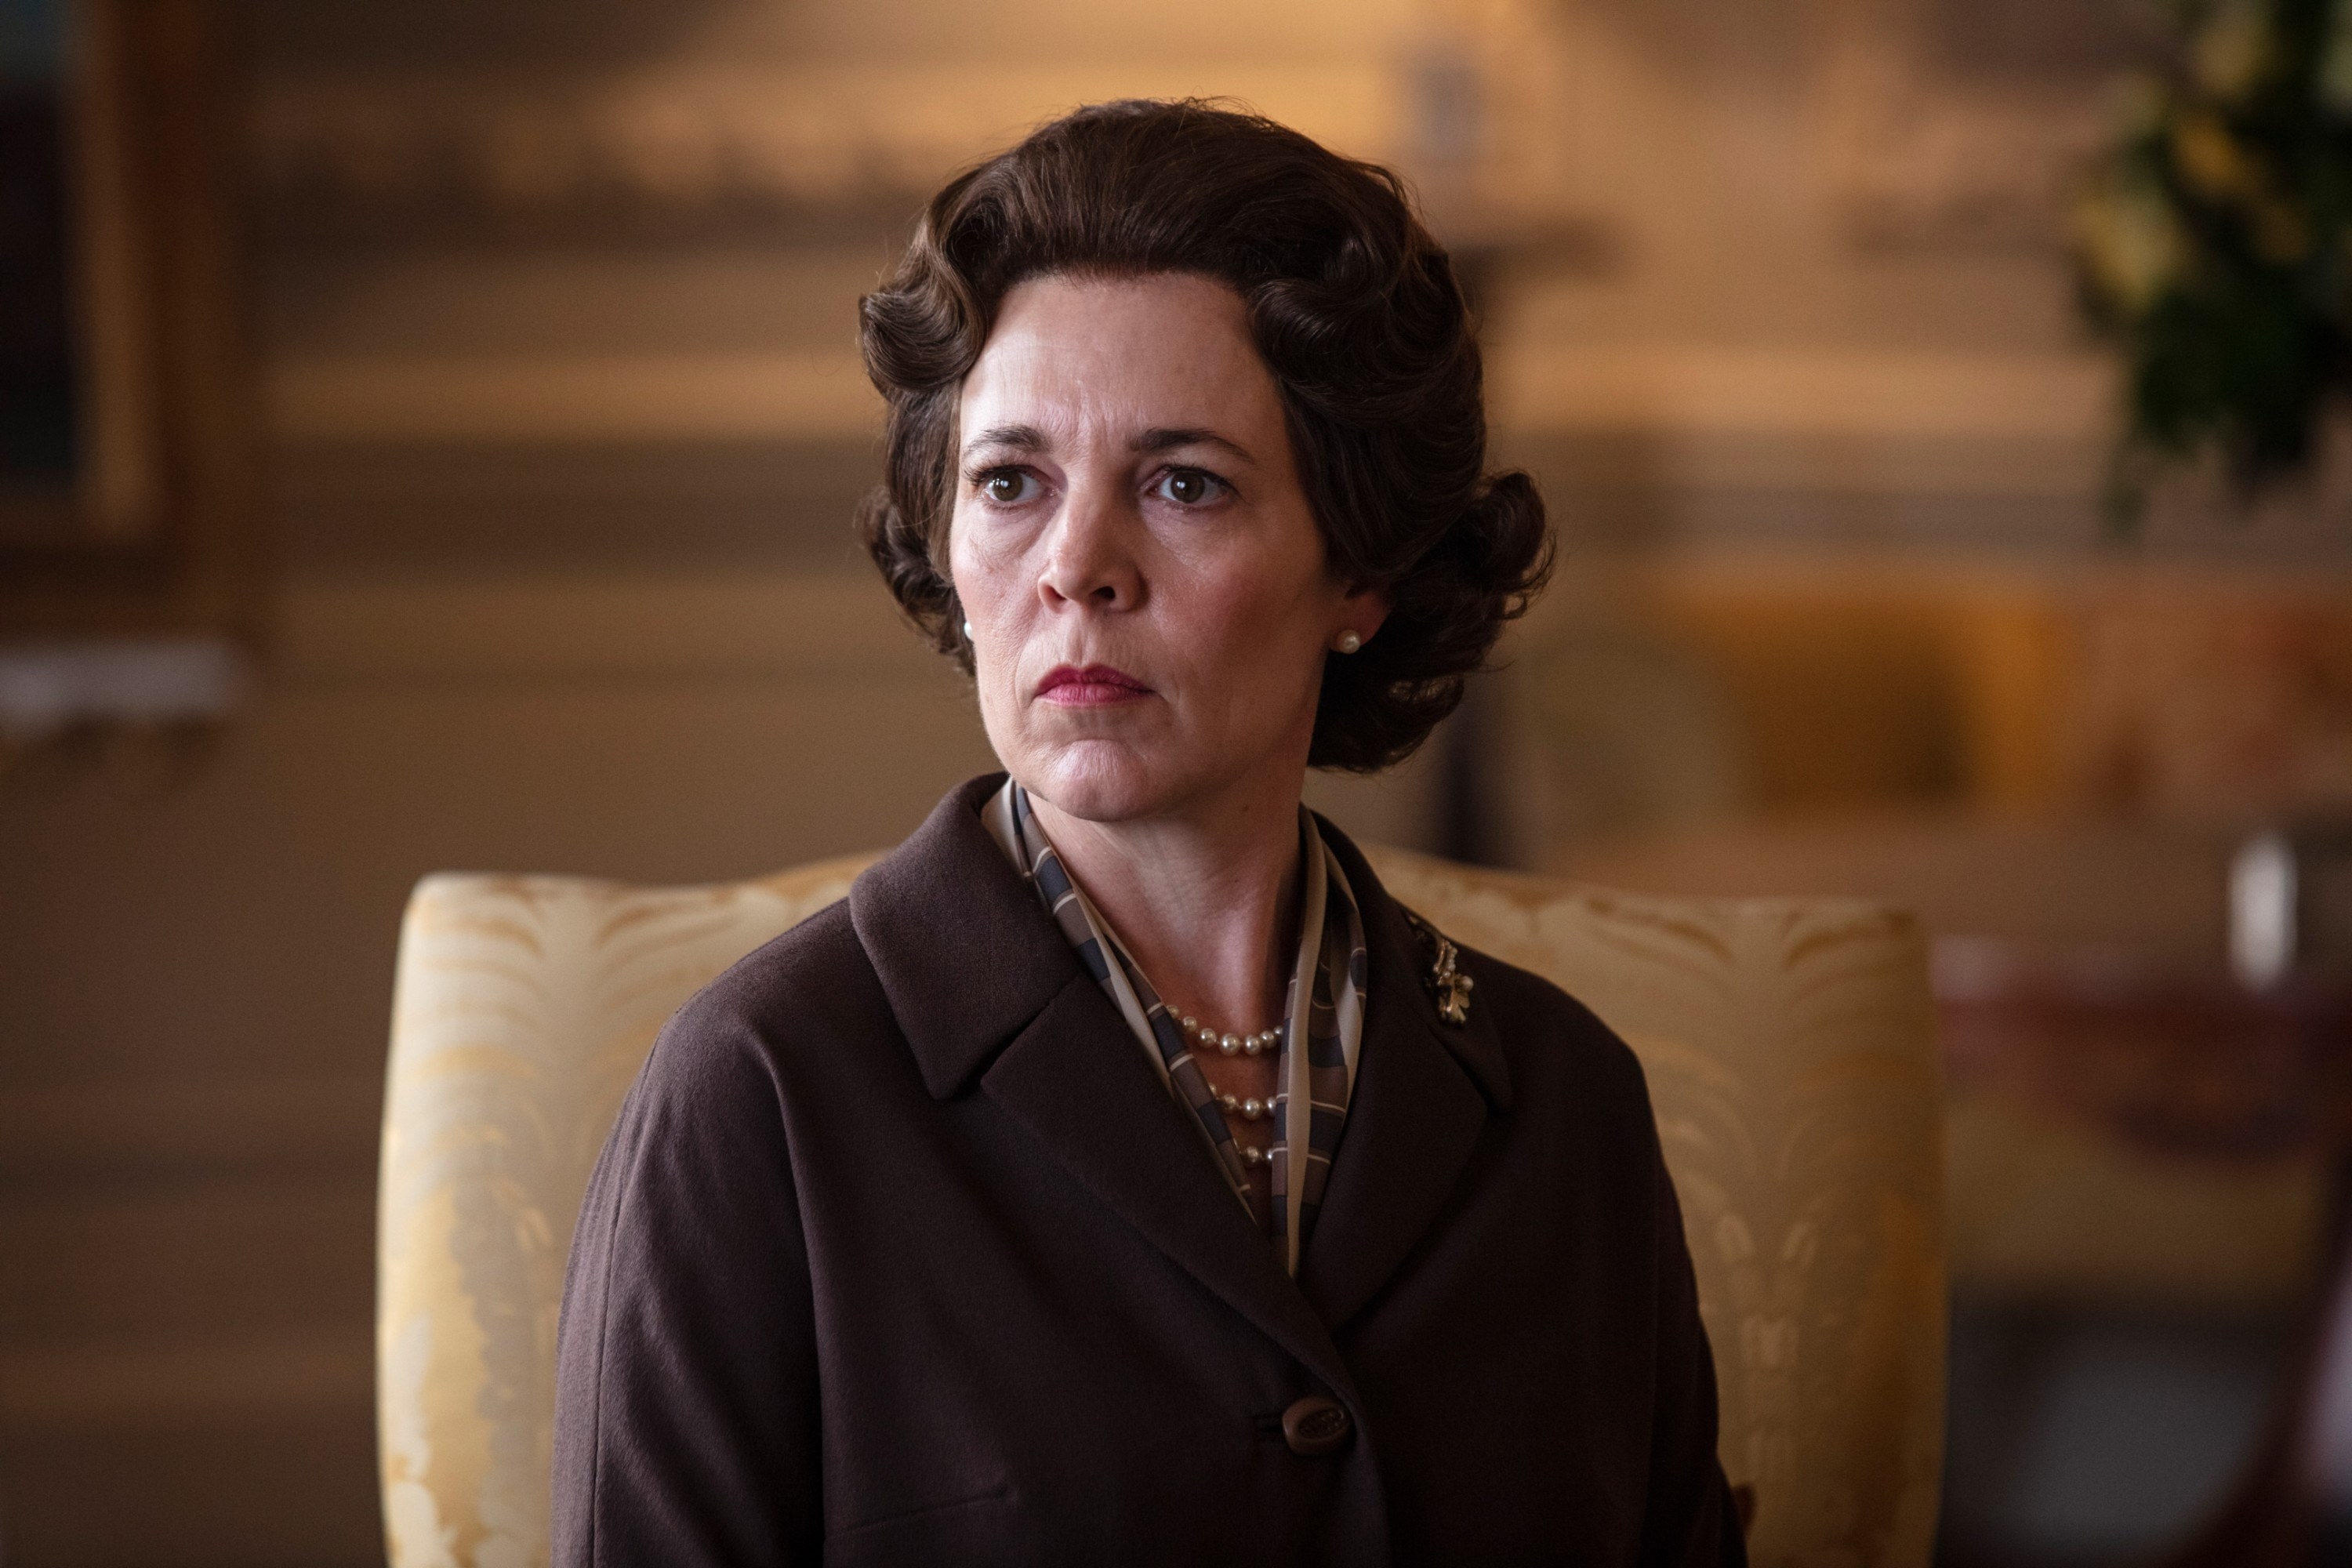 Olivia Colman staring intensely.